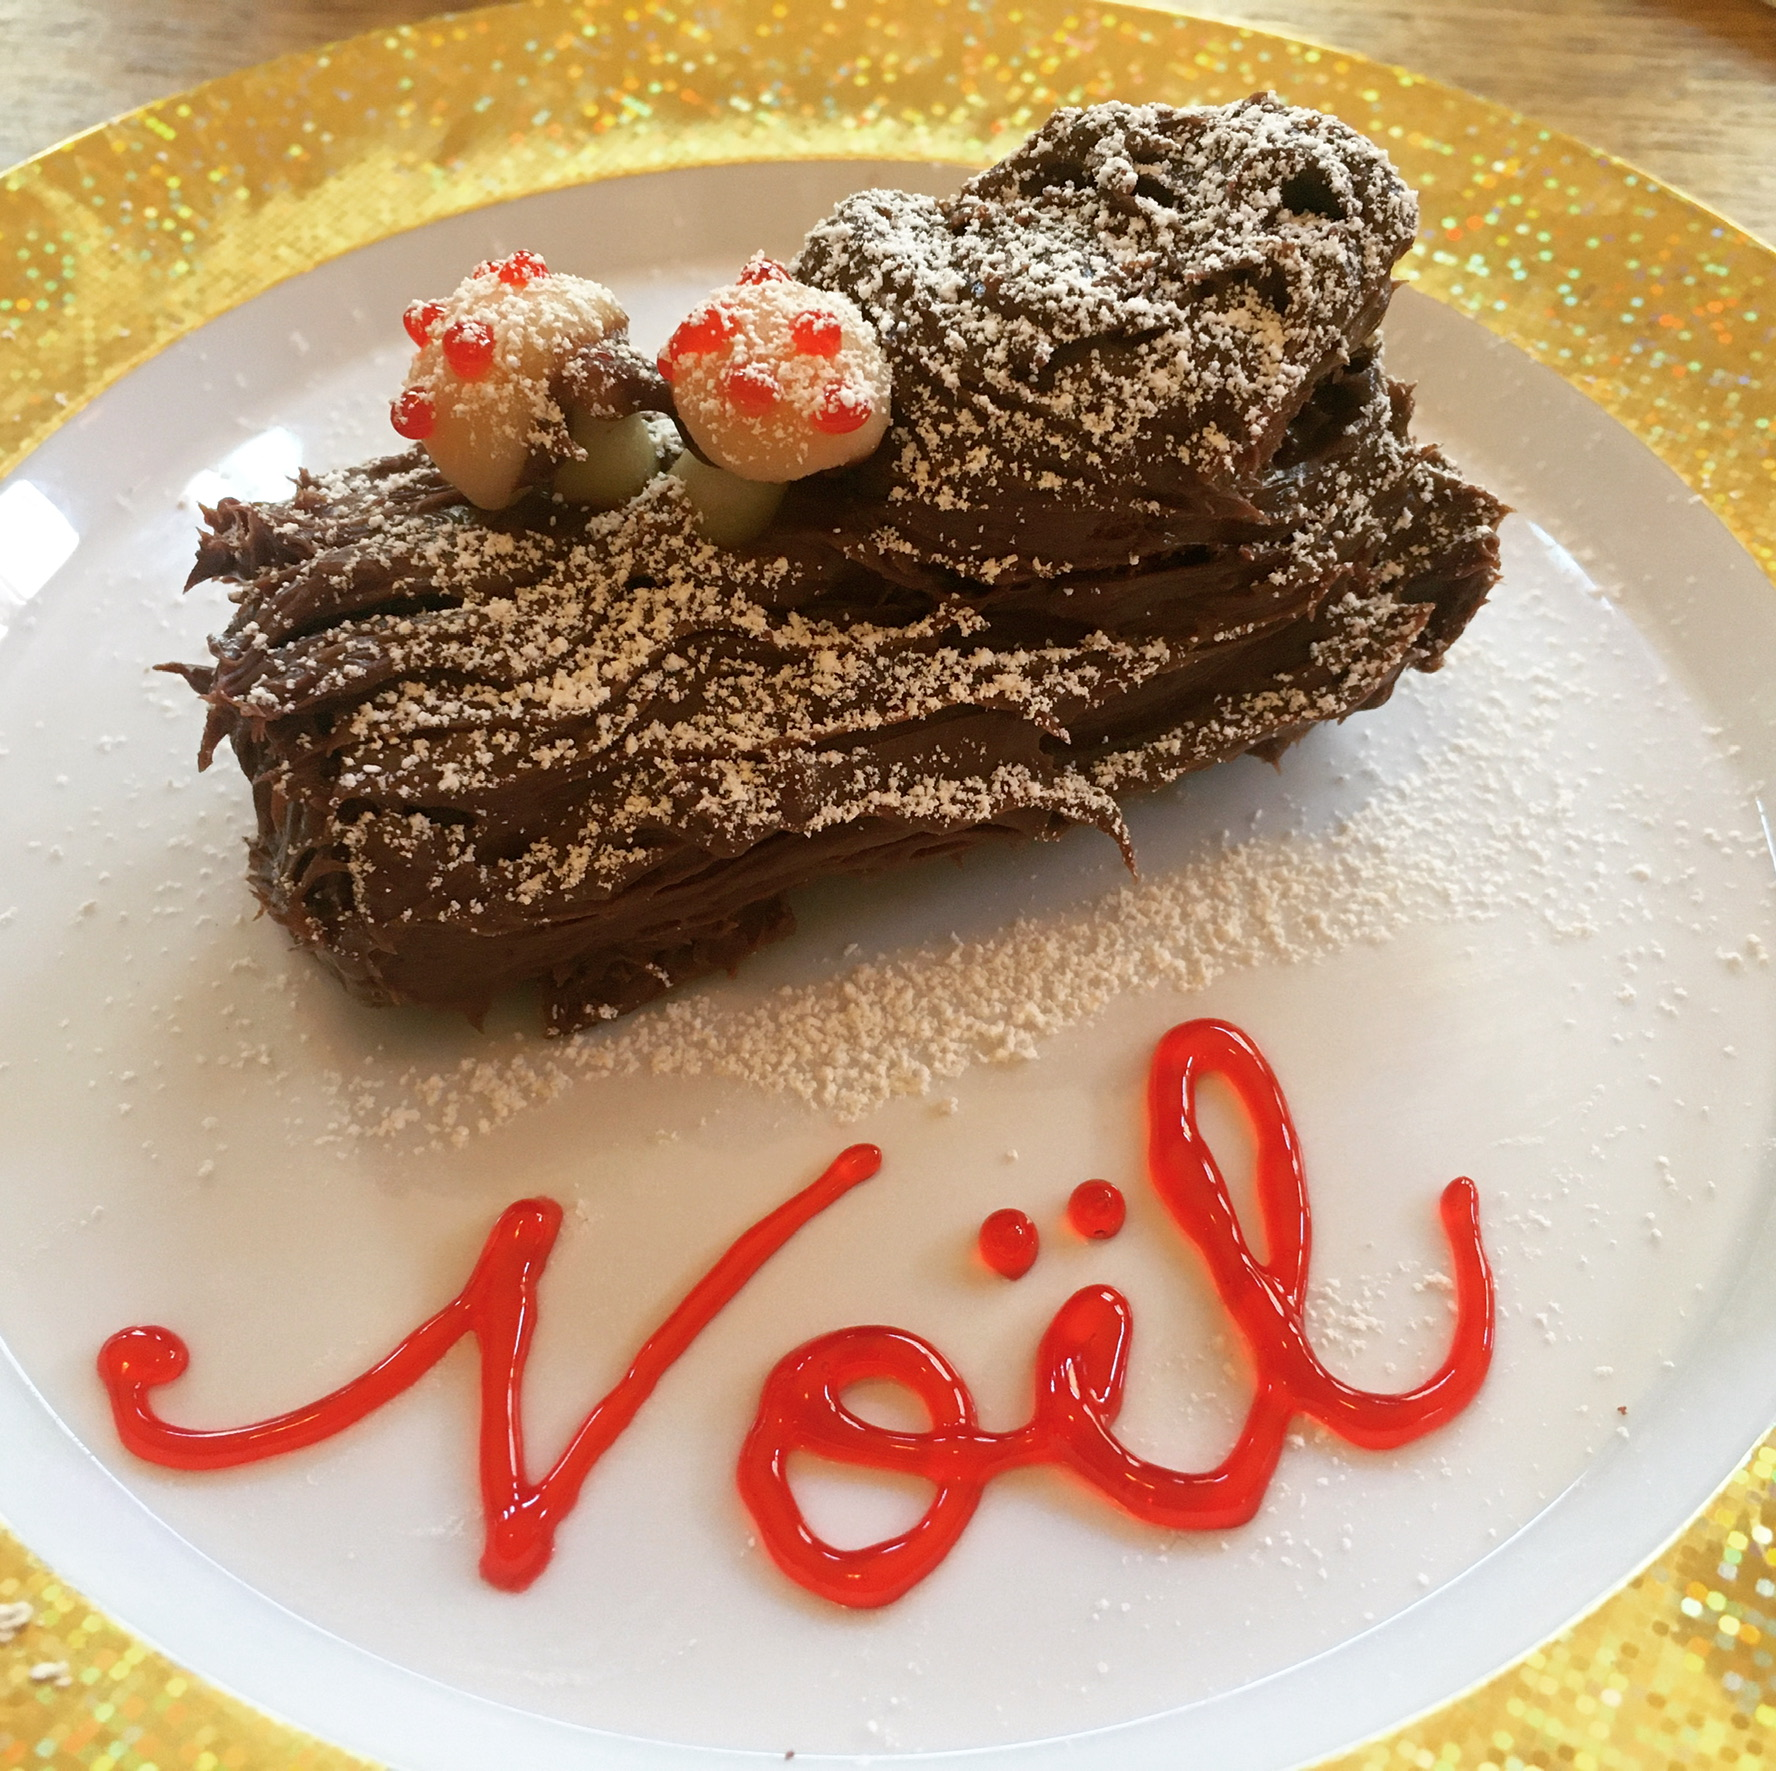 A small cake shaped like a log, dusted with powdered sugar "snow." "Noel" is written in shiny red gel.